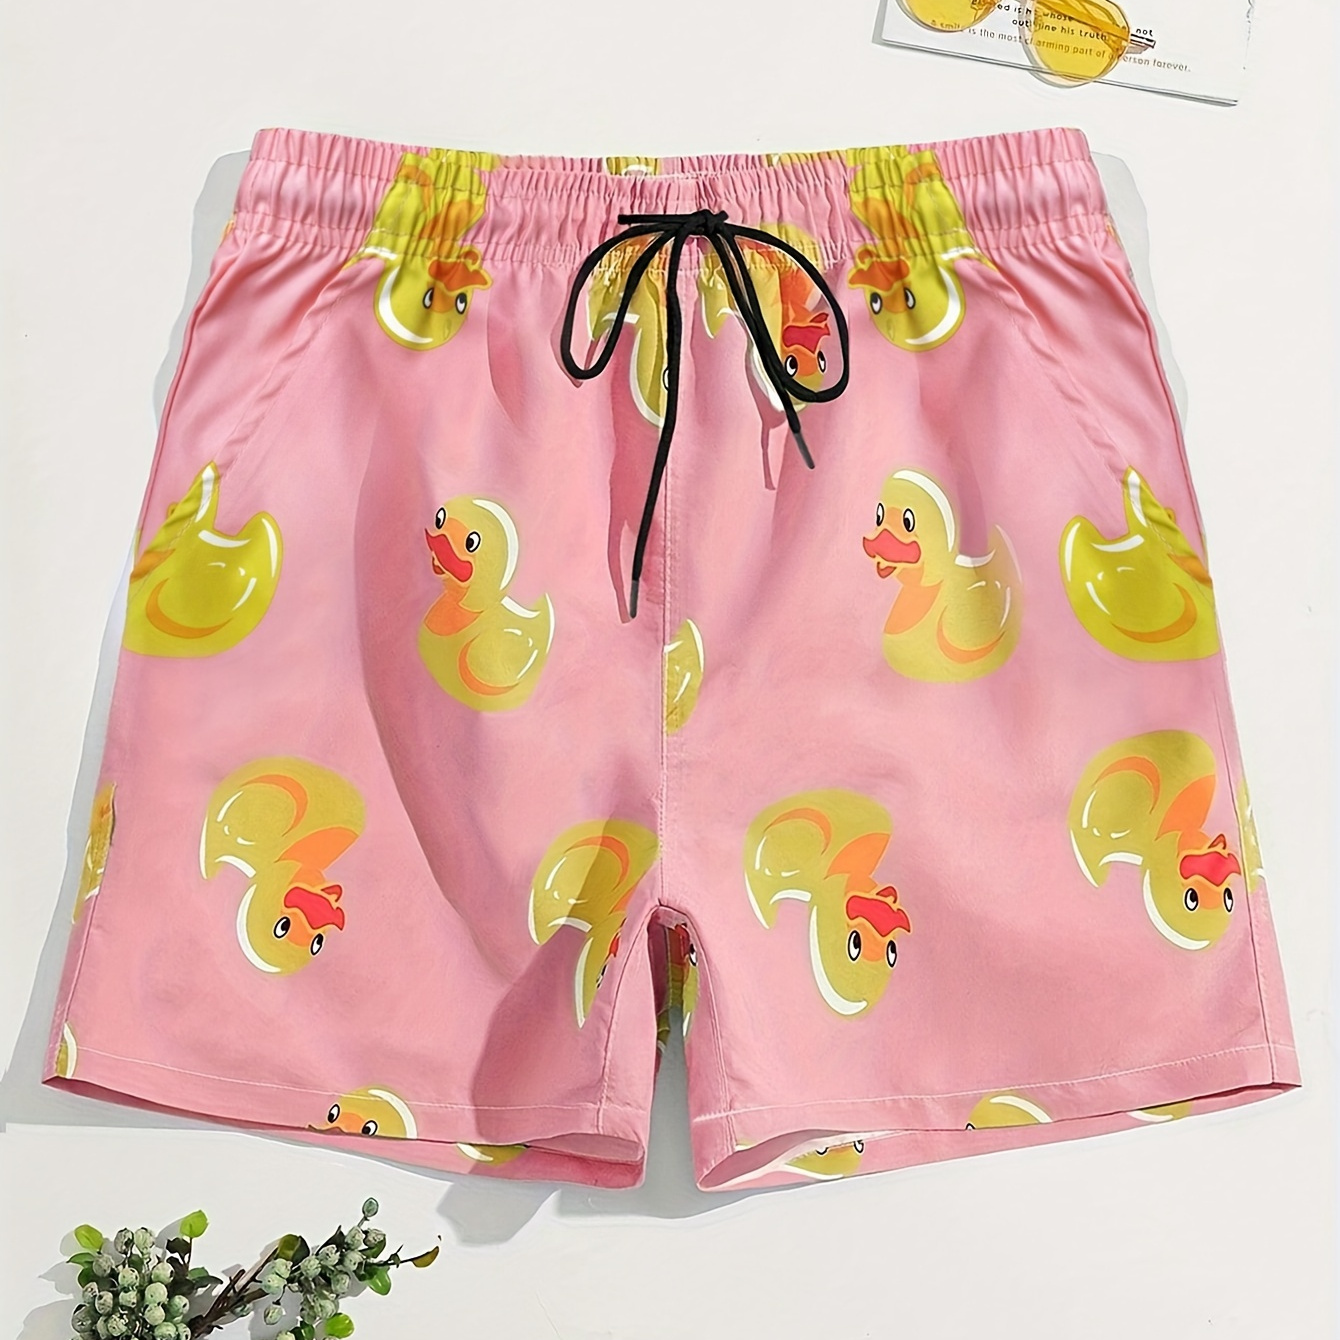 

Casual Men's Swim Trunks With Breathable Fabric And Fun Cartoon Duck Design For Summer Beach, Pool, And Surfing